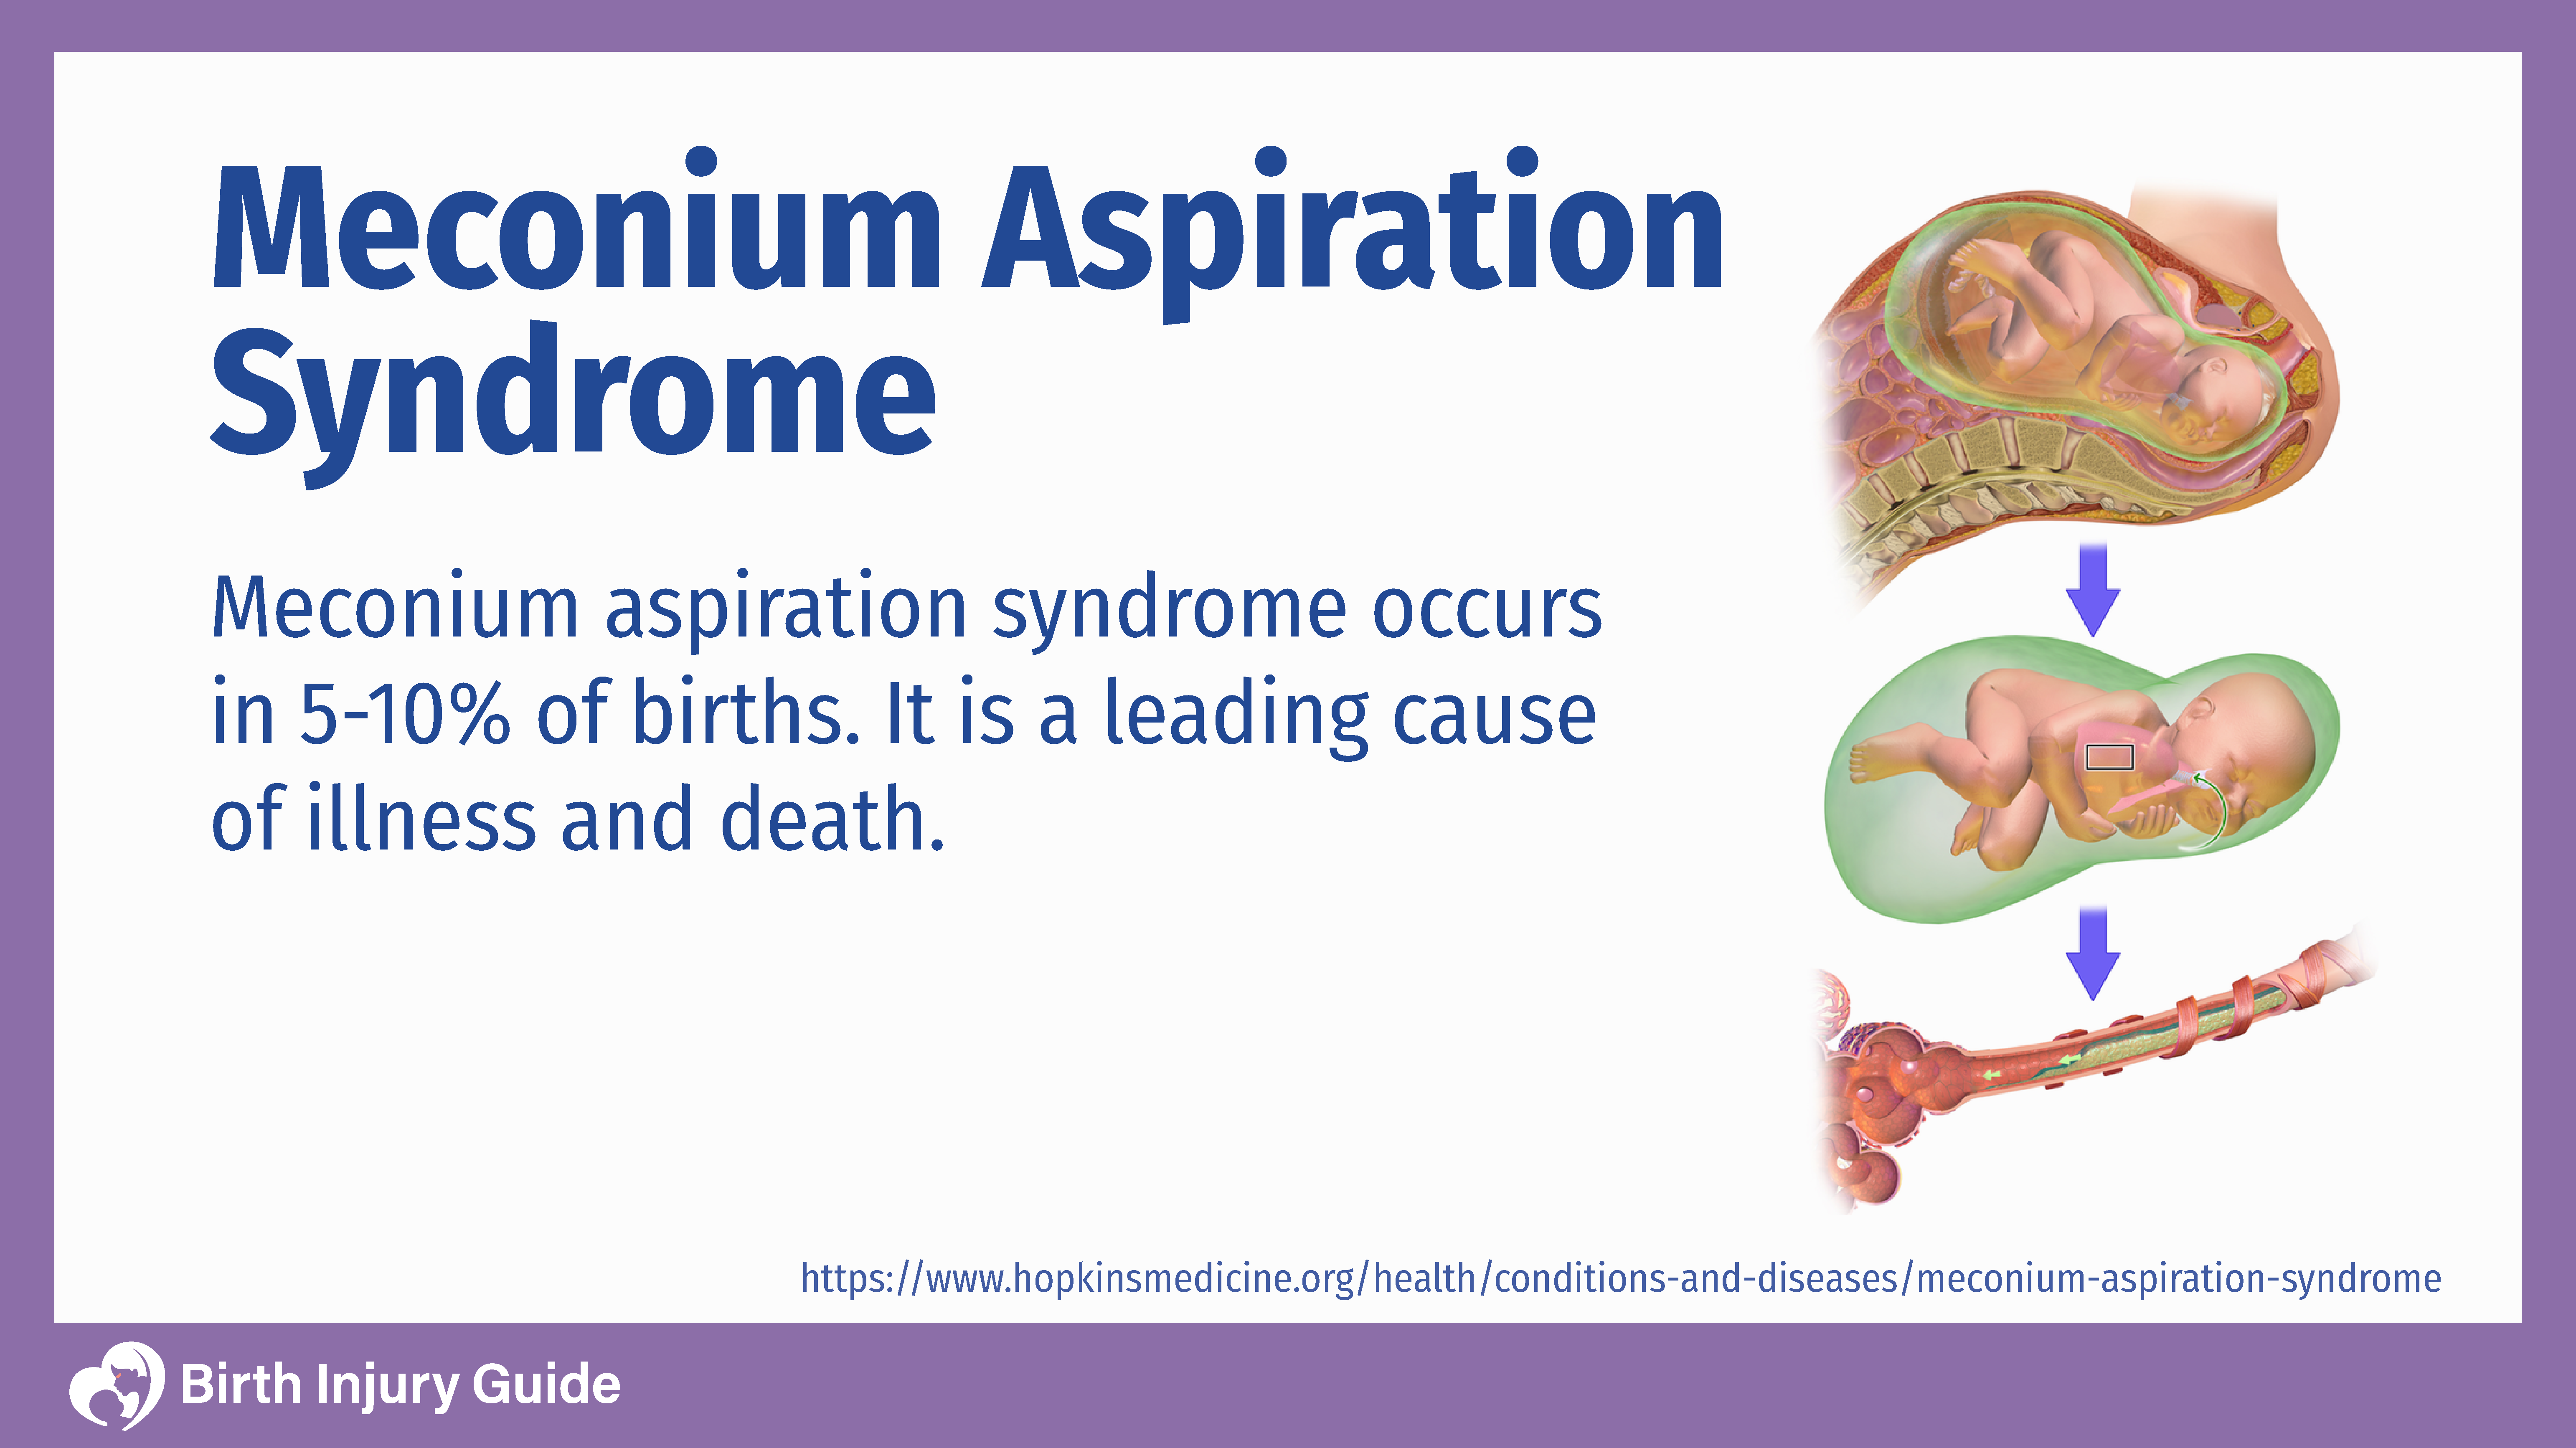 meconium aspiration syndrome occurs in 5-10% of births. Baby inside of a mother's placenta.